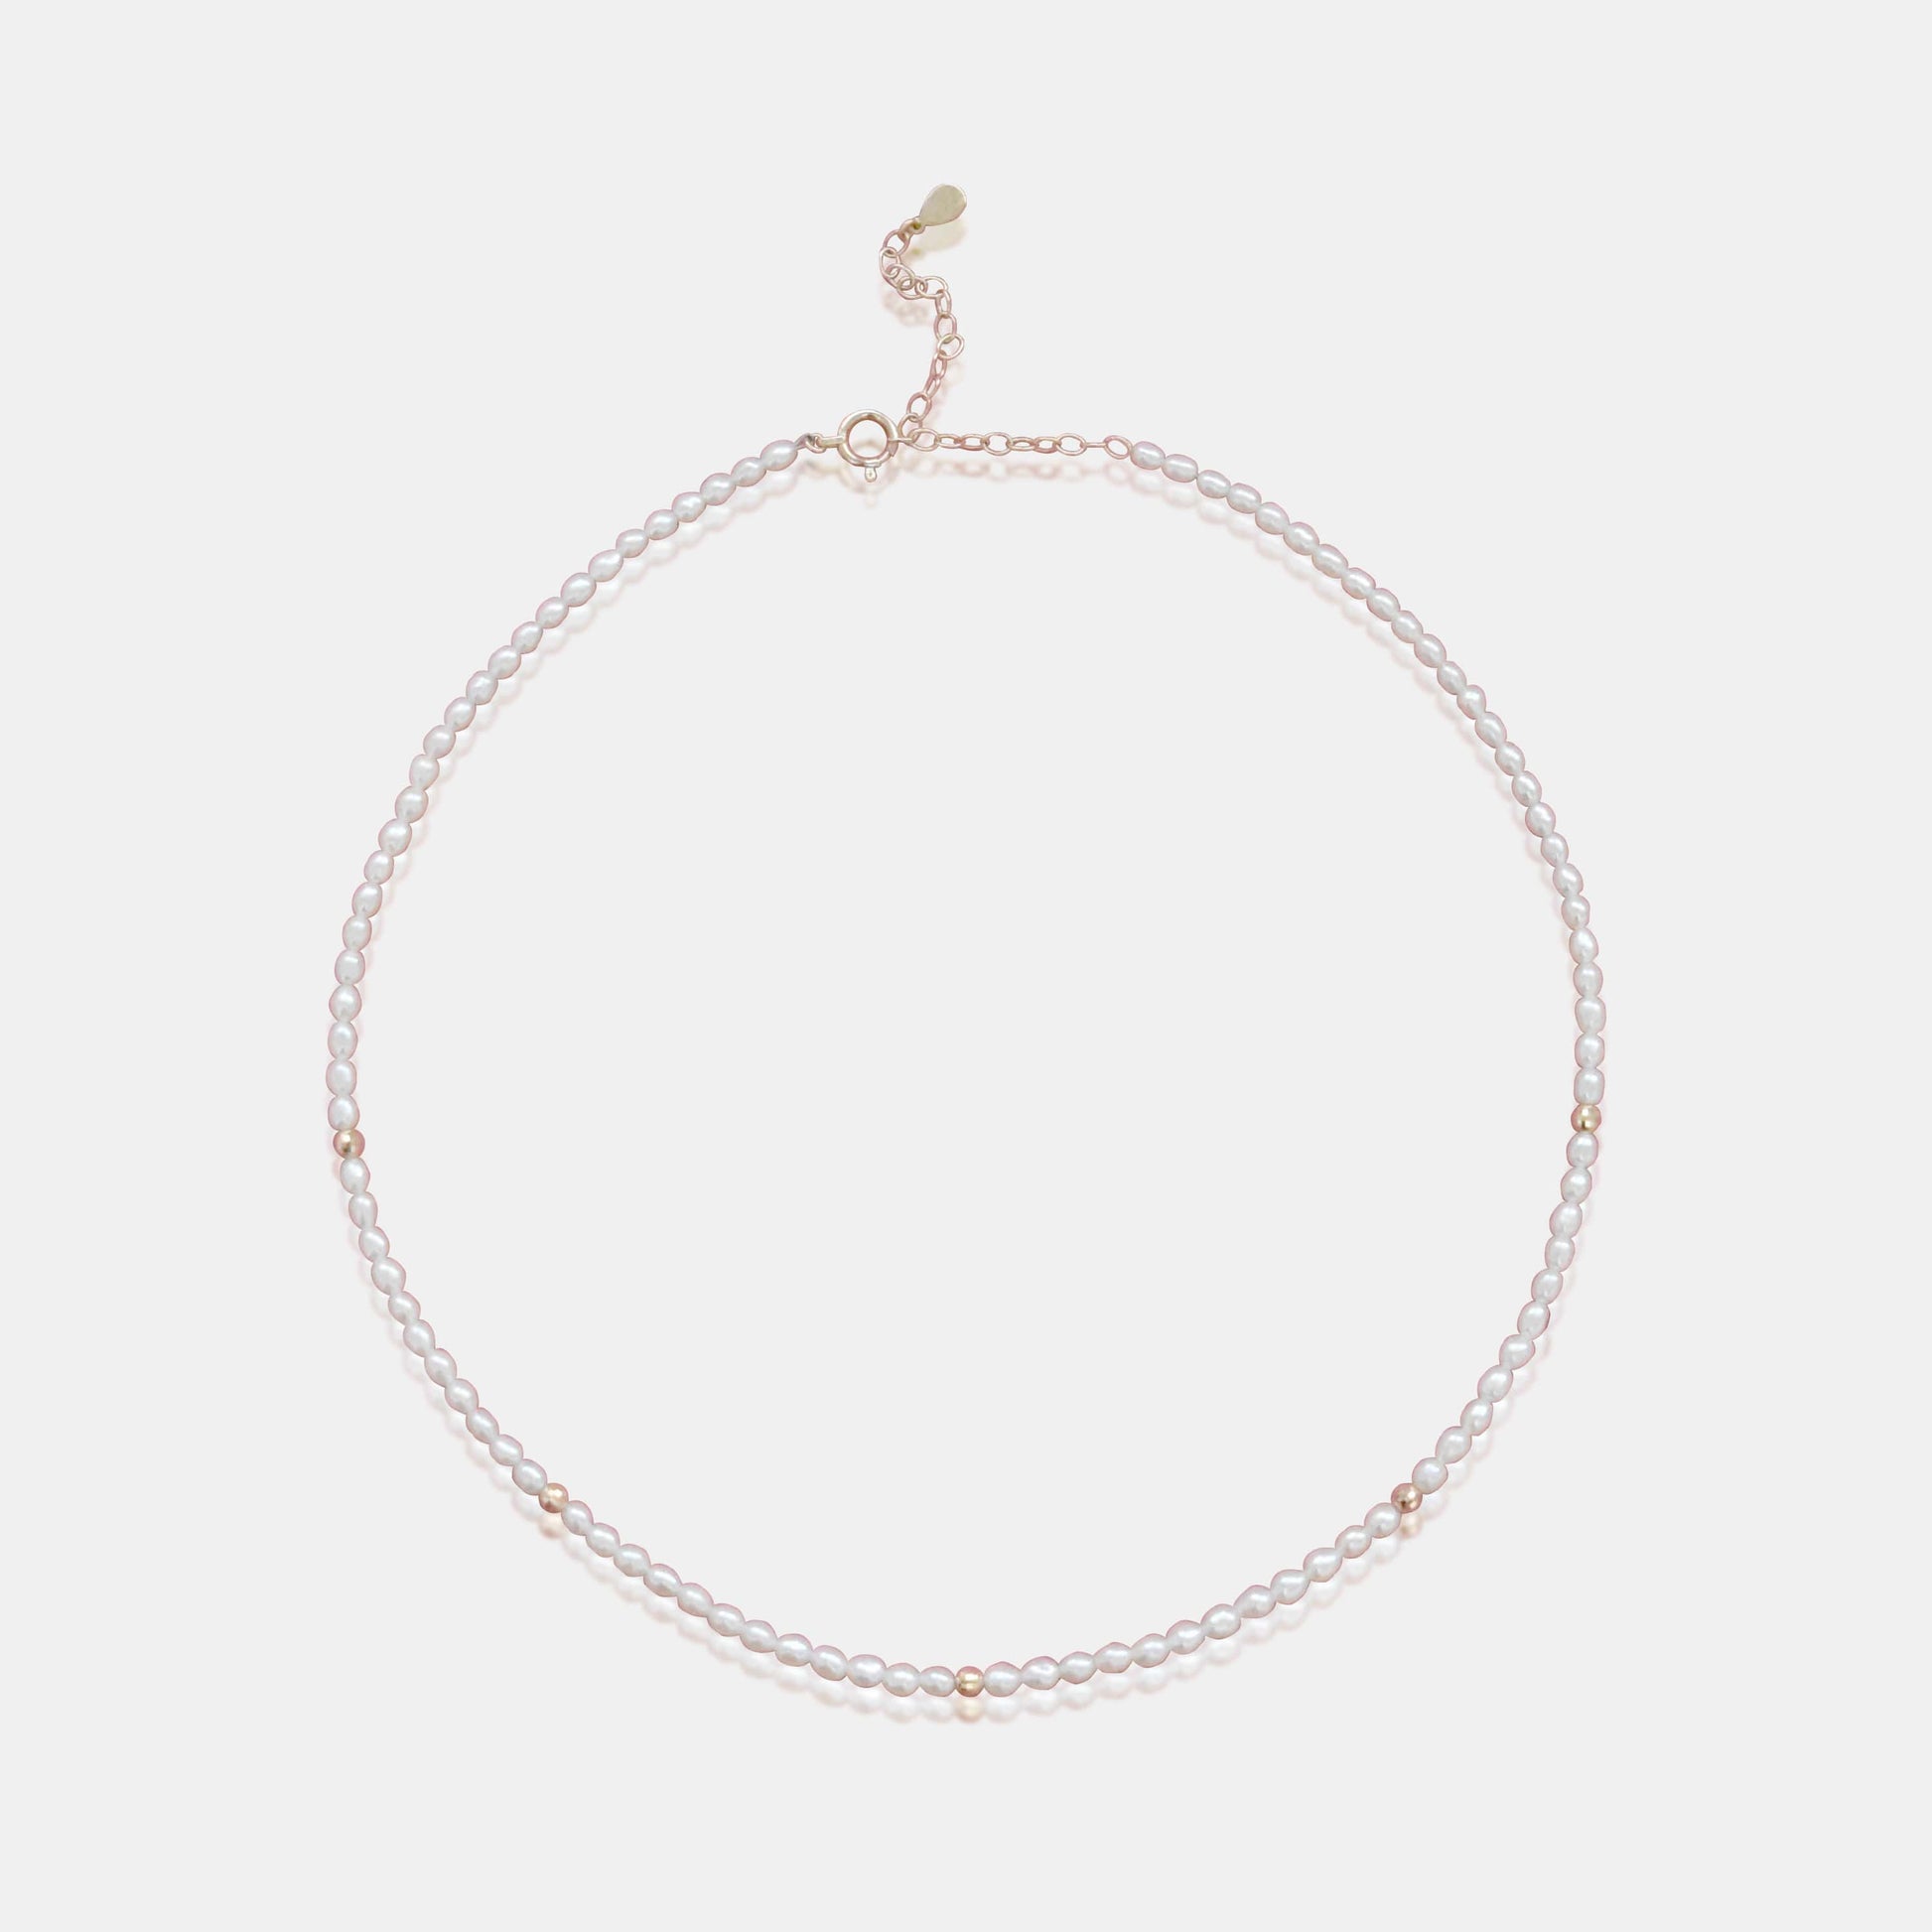 Embrace timeless beauty with the Amore Necklace - a graceful white pearl necklace complemented by exquisite gold beads.